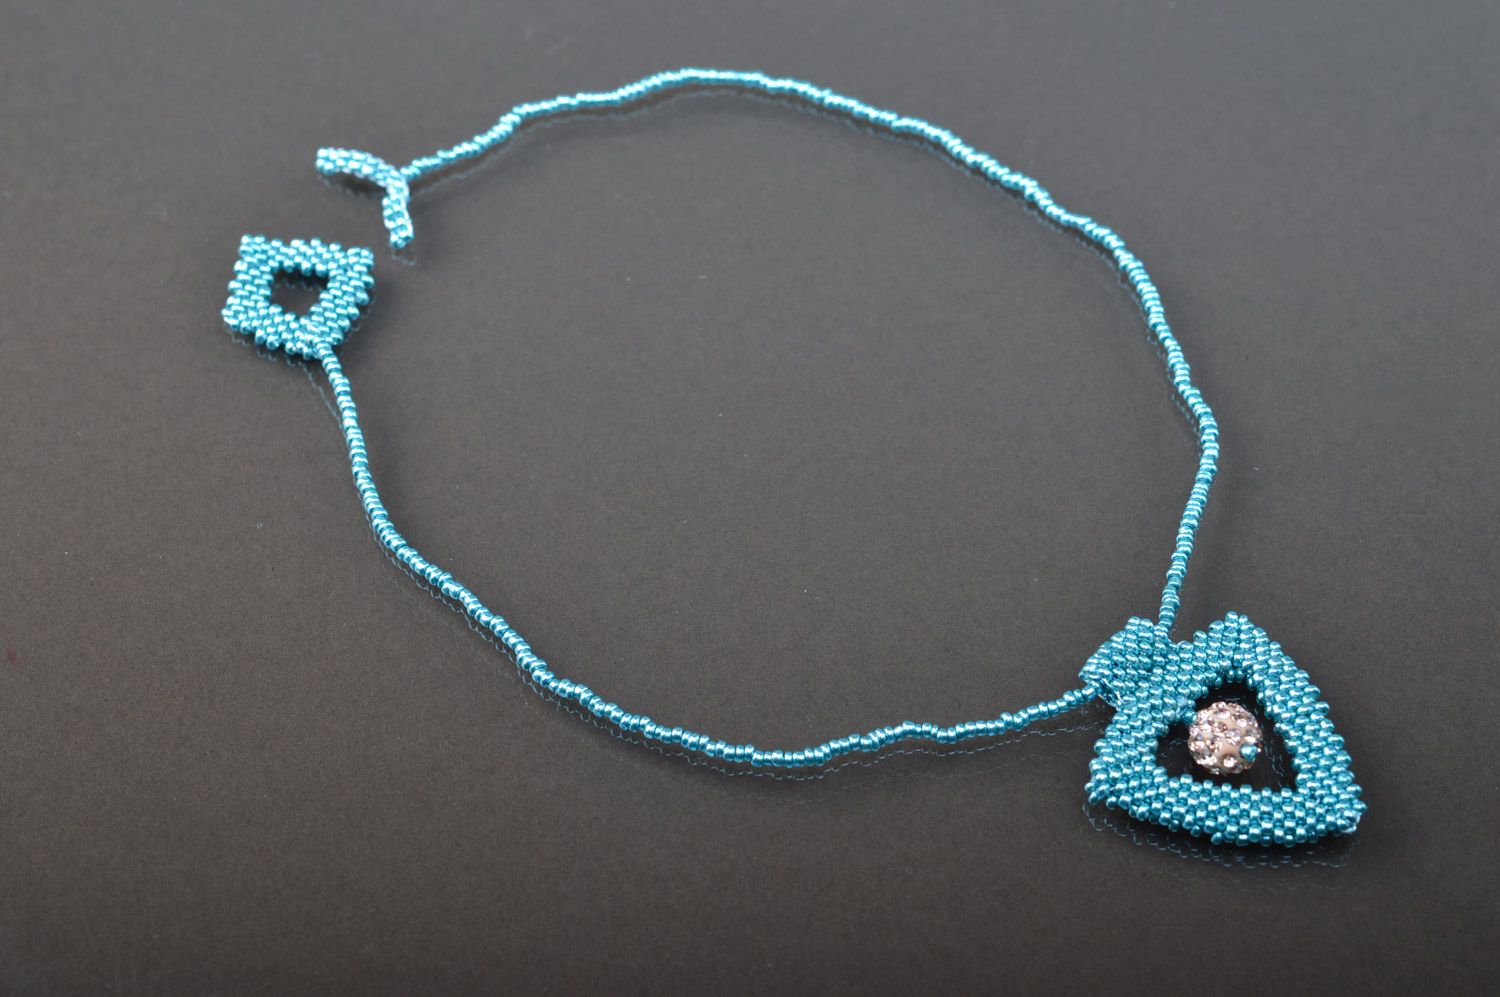 Handmade light blue triangle neck pendant woven of beads on cord with toggle lock photo 2